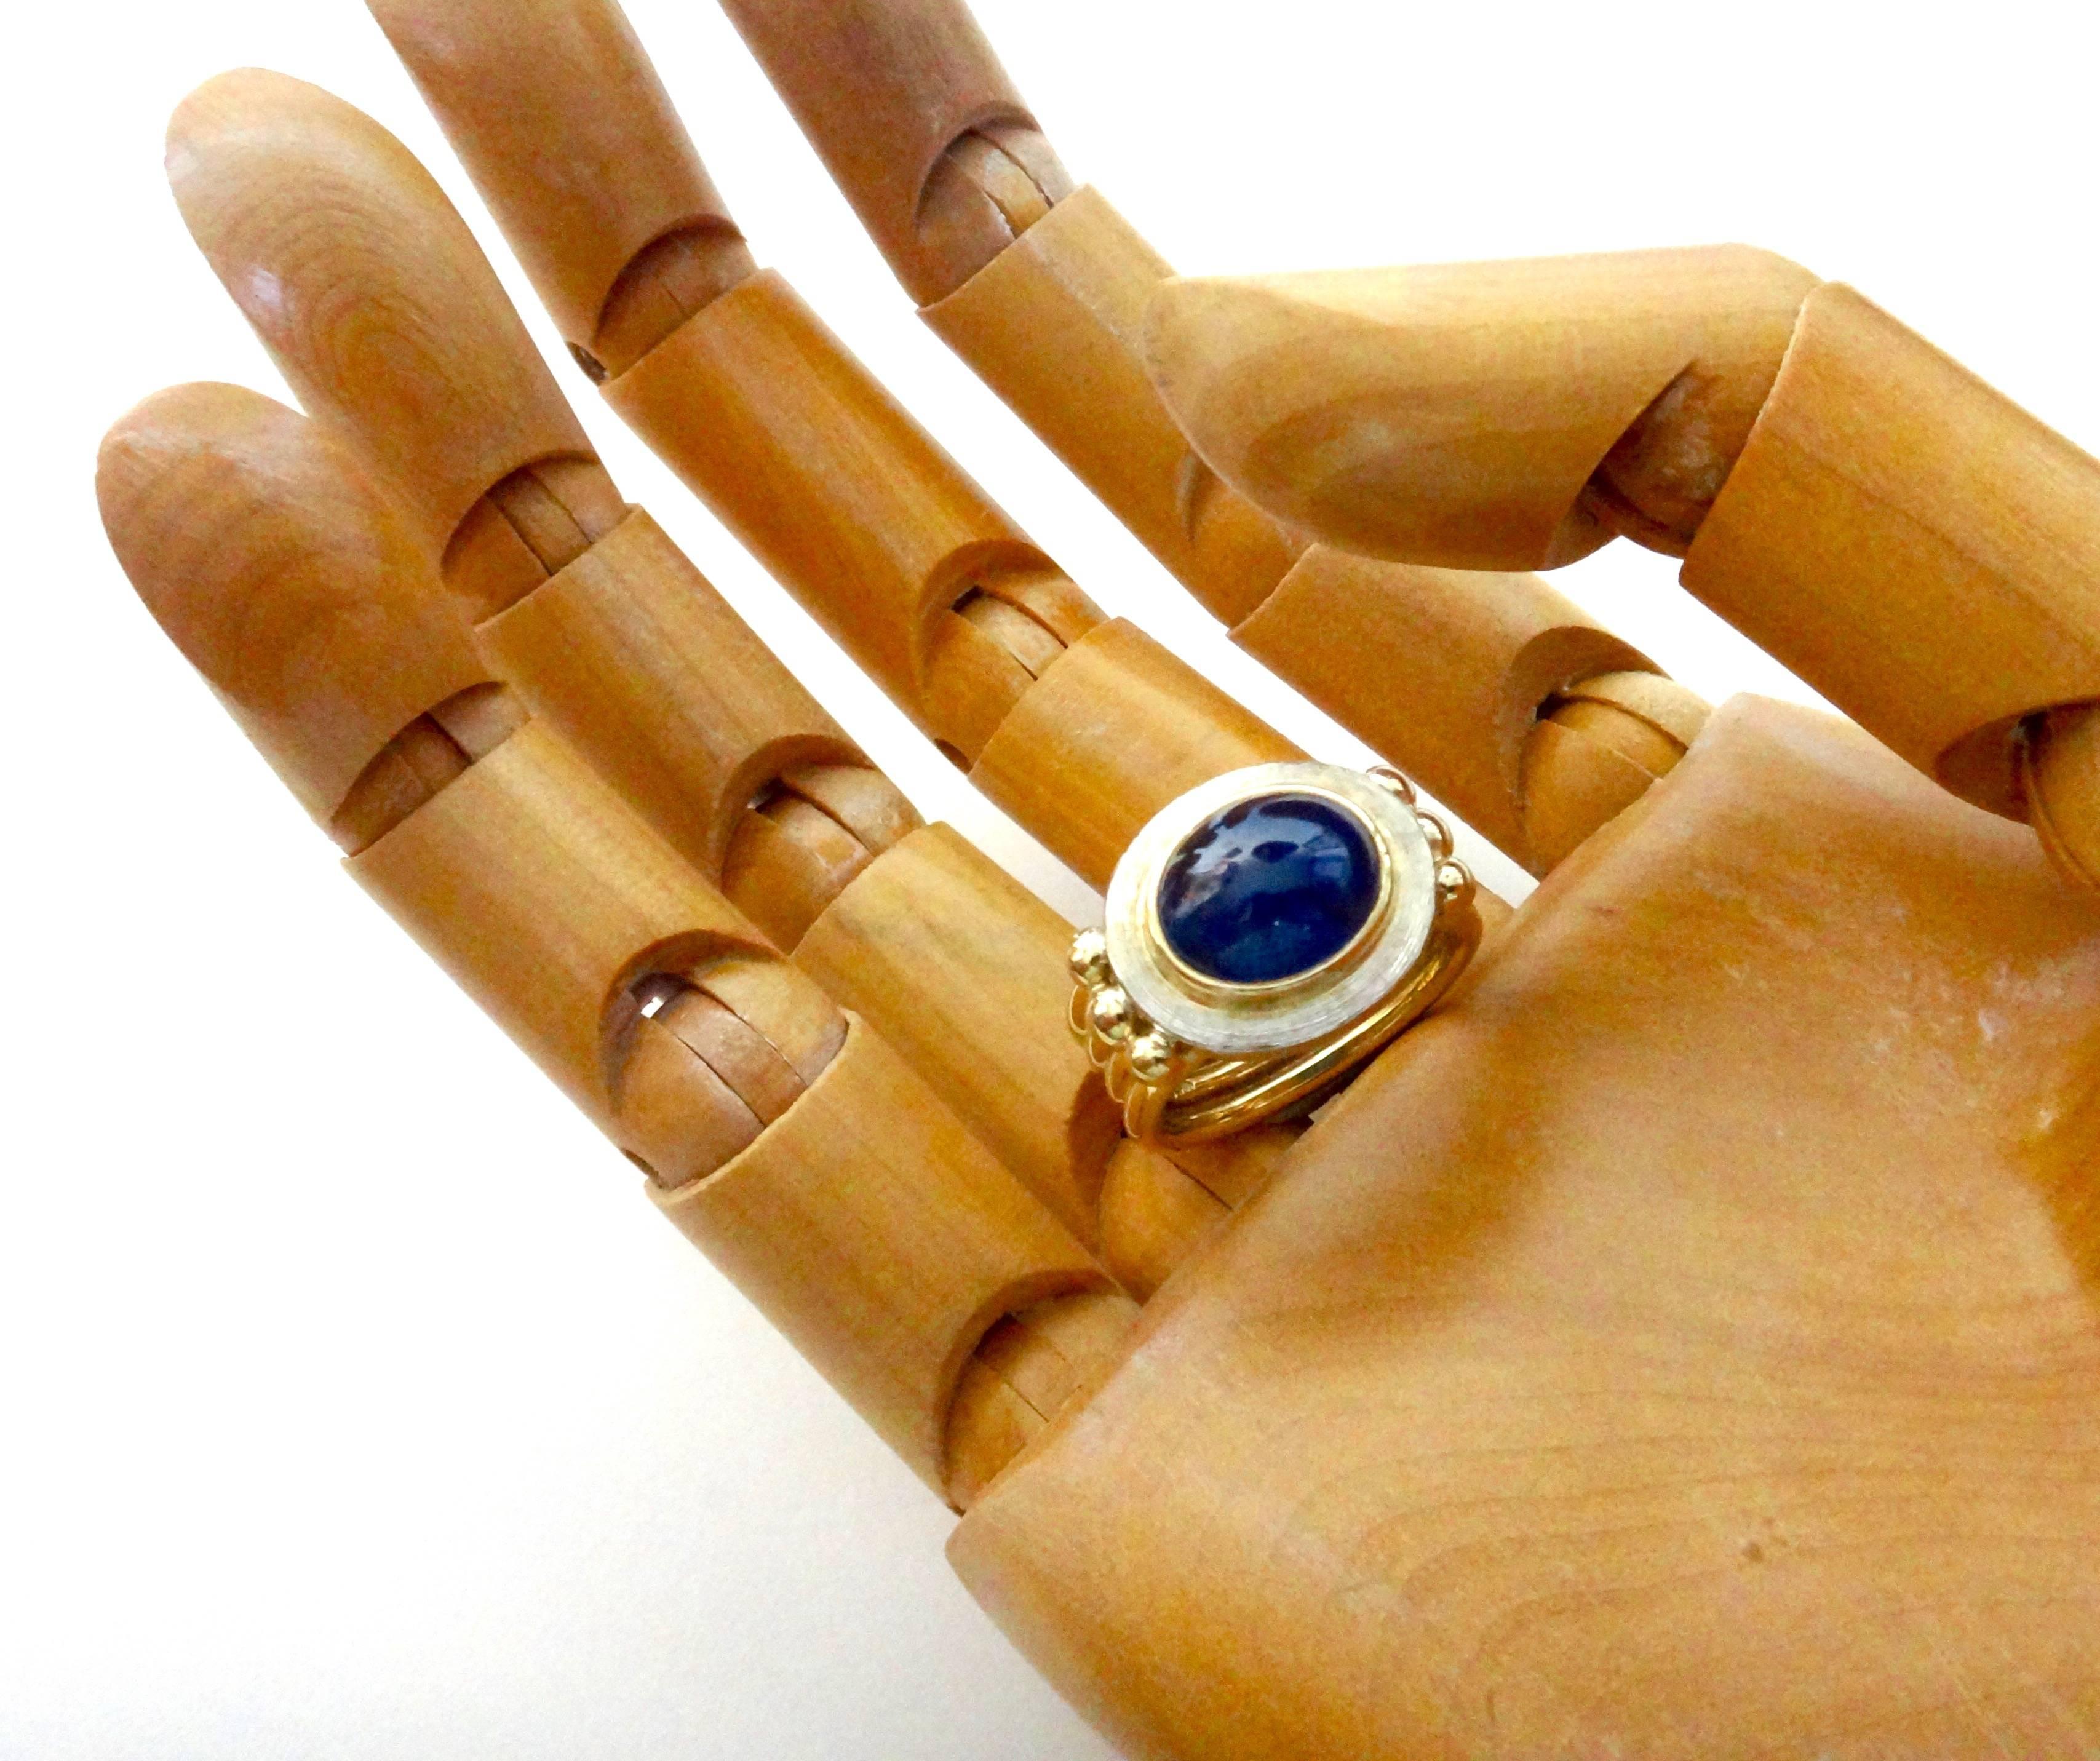 Calling attention to jewelry designs from centuries past, this "Relic" ring is set with a dark blue cabochon sapphire.  (Origin: Thailand)  A highlight of the ring is the Florentine engraving around the white gold bezel which catches and